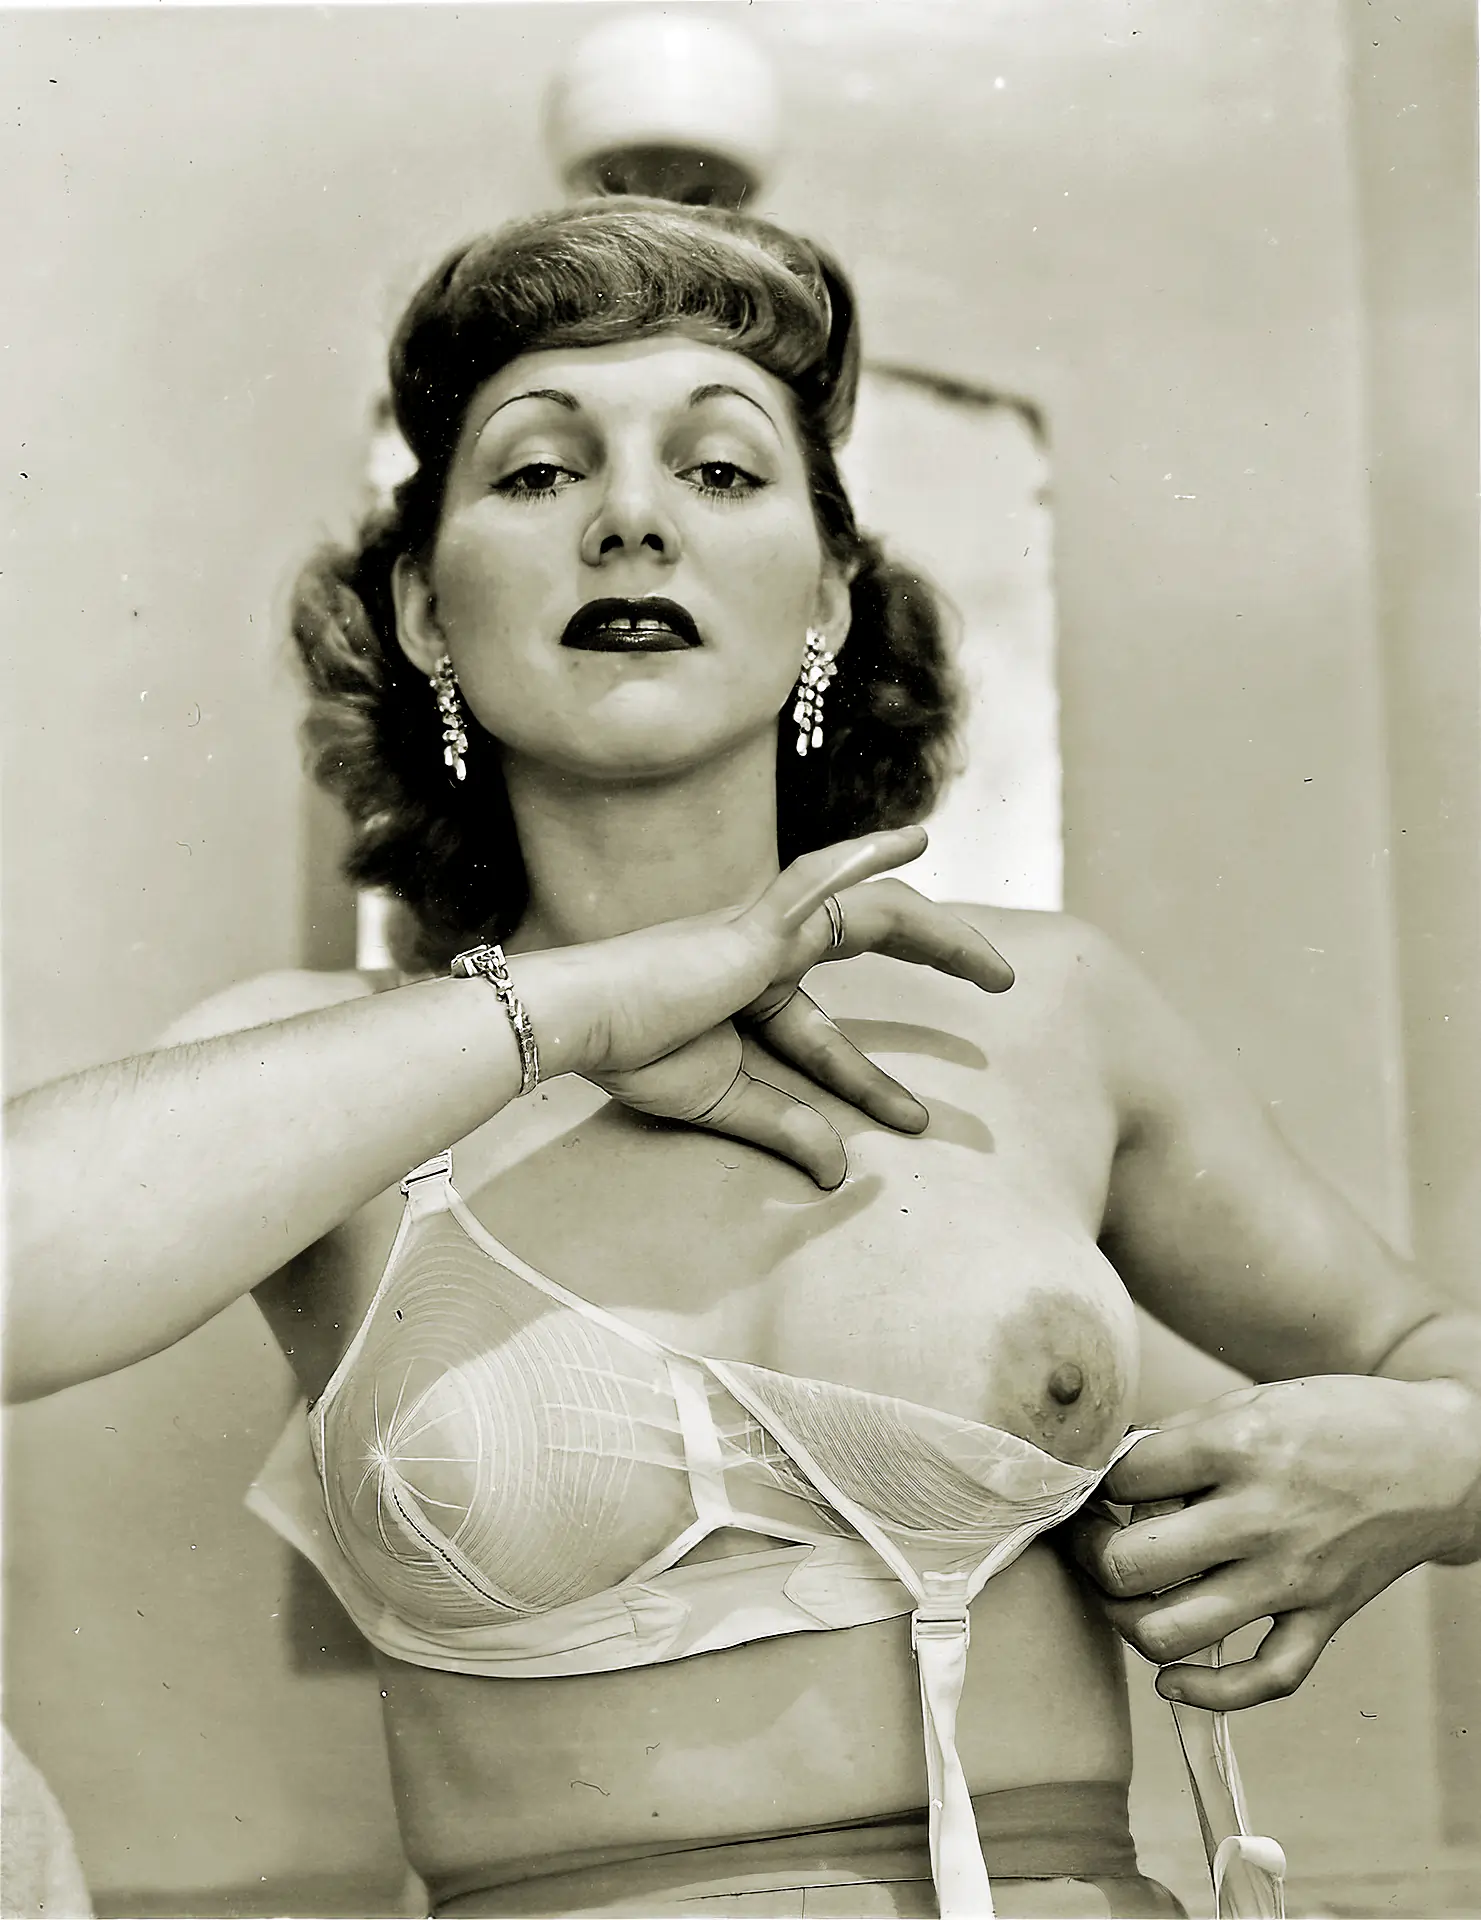 Vintage bra porn photos with mature woman getting her big tits with large nipple areolas out of a white bra in the 1940s